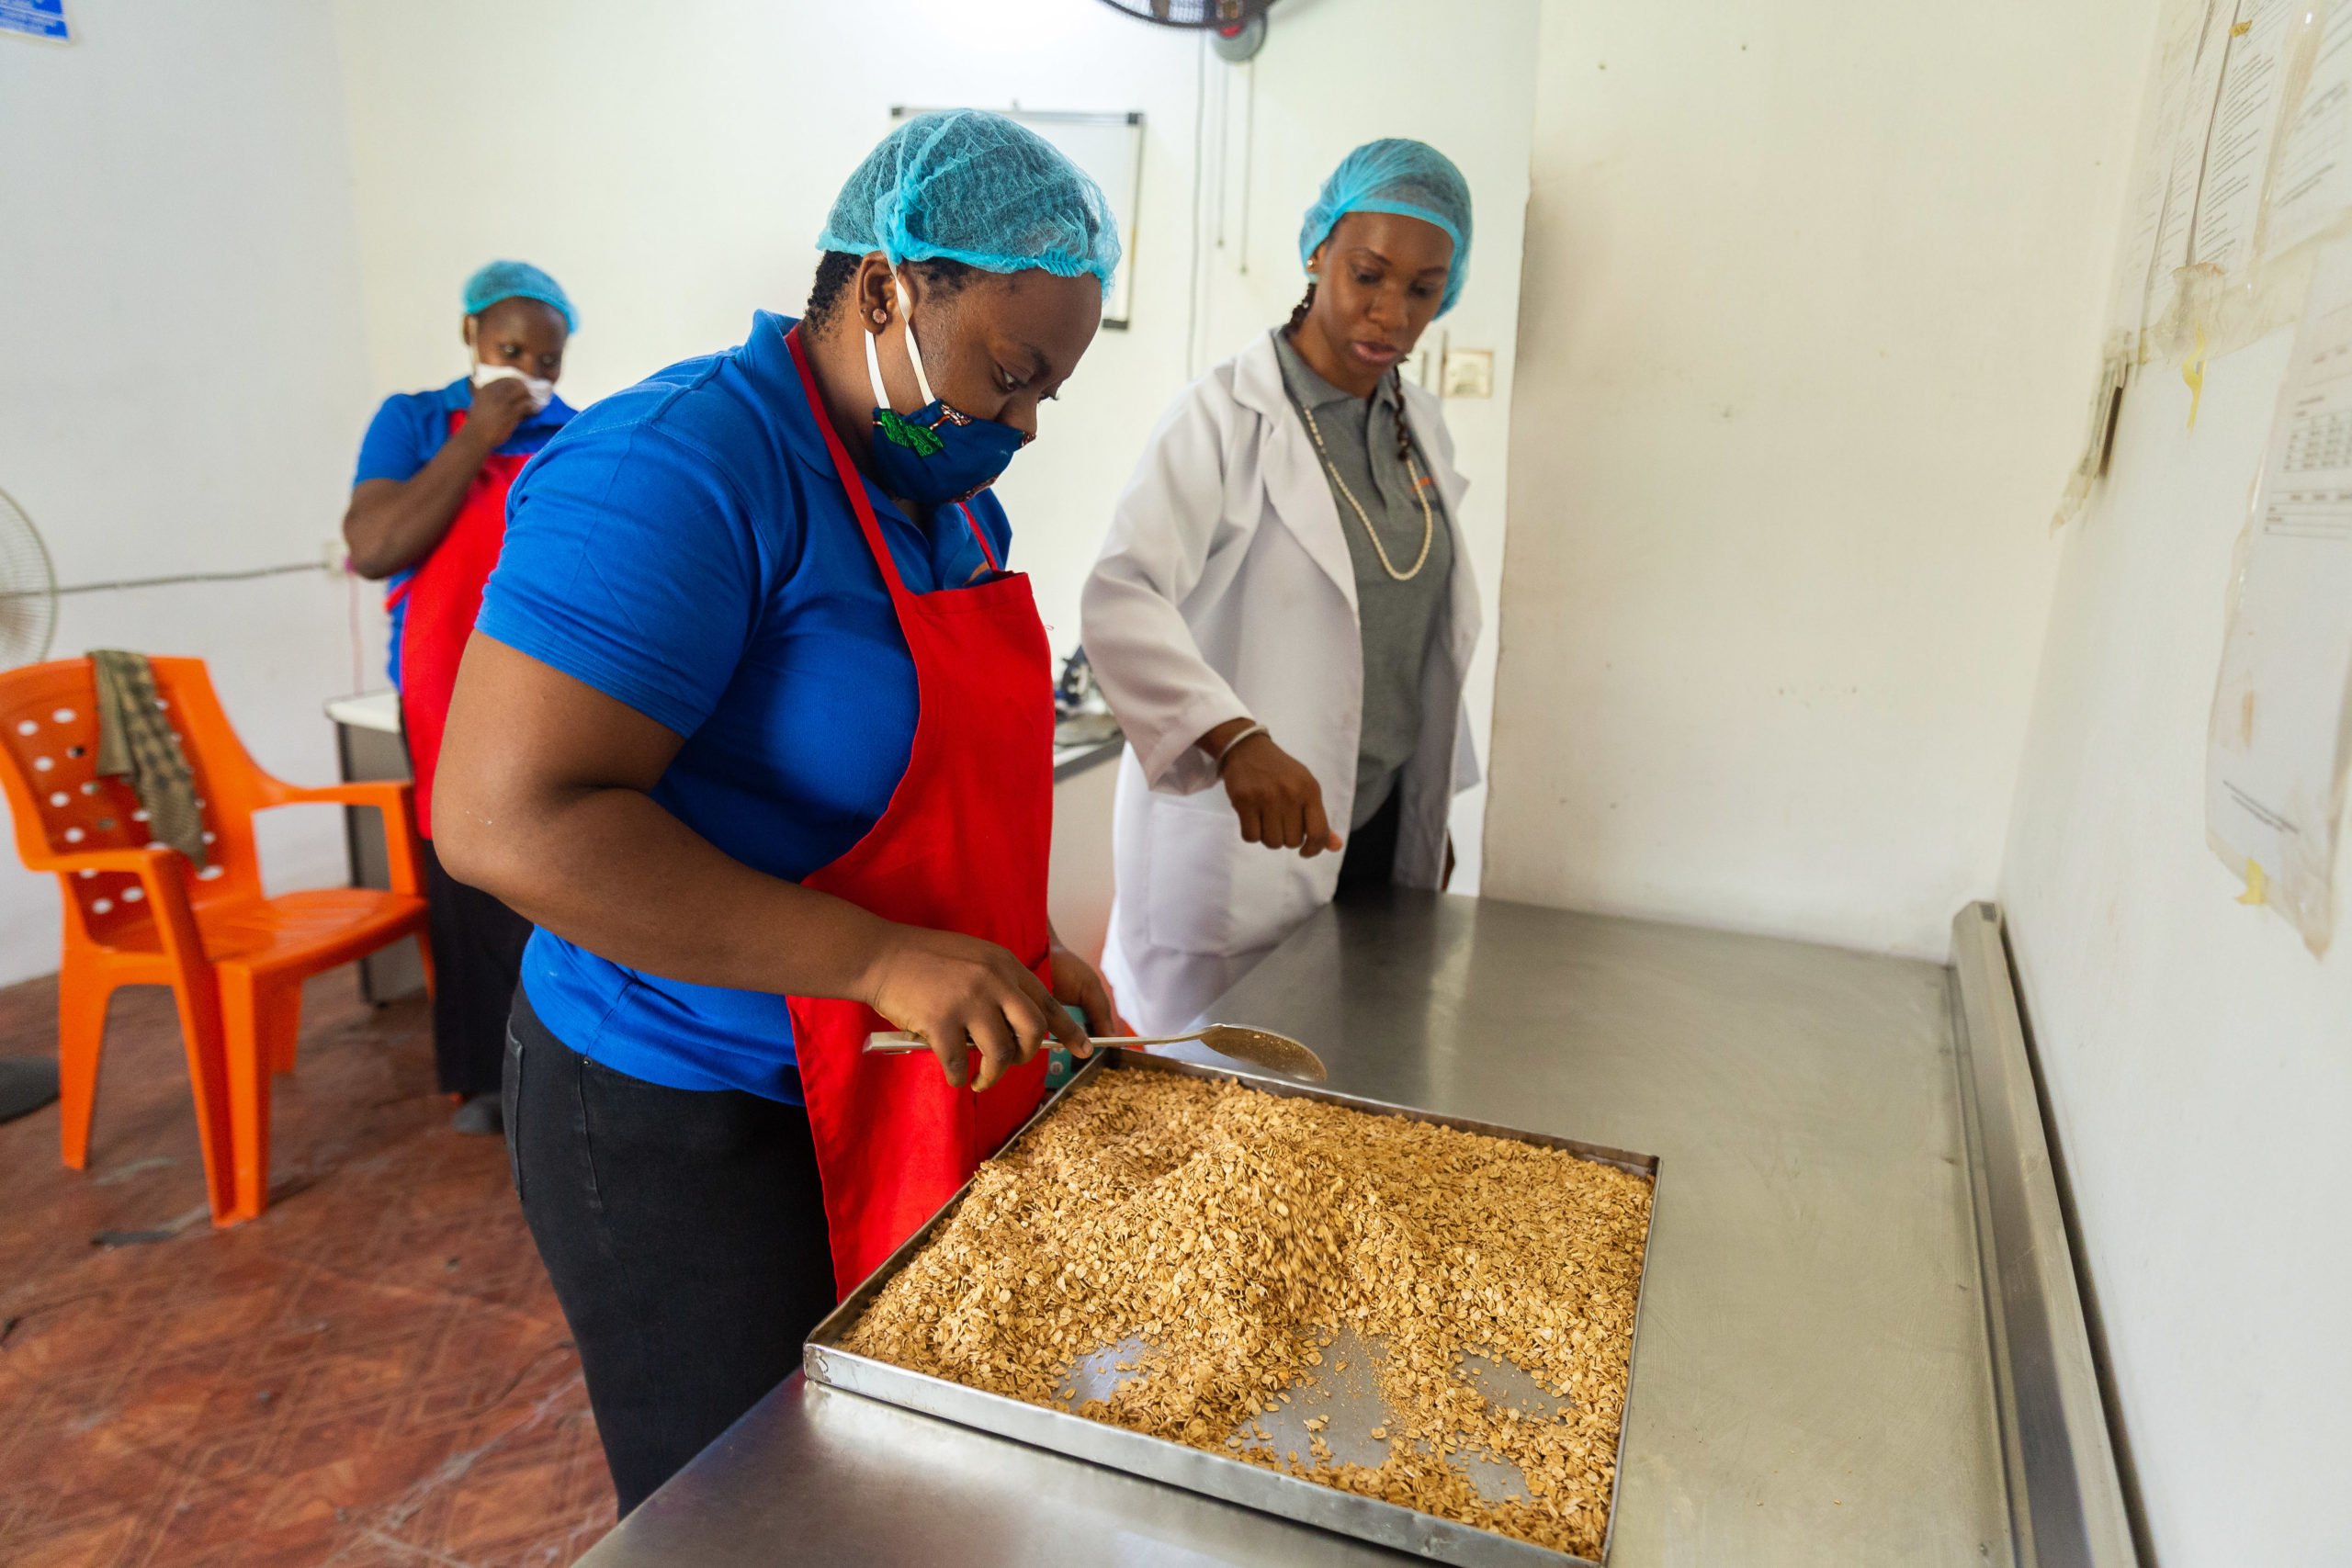 Gloria Ettidinma, a staff member at Nicnax Enterprises, inspects the granola at Nicnax Enterprises in Lagos, Nigeria on 28th January 2021. The Cherie Blair Foundation for Women continues to support women entrepreneurs across many African countries, including Nigeria, through their blended learning programmes, like Road to Growth and HerVenture.